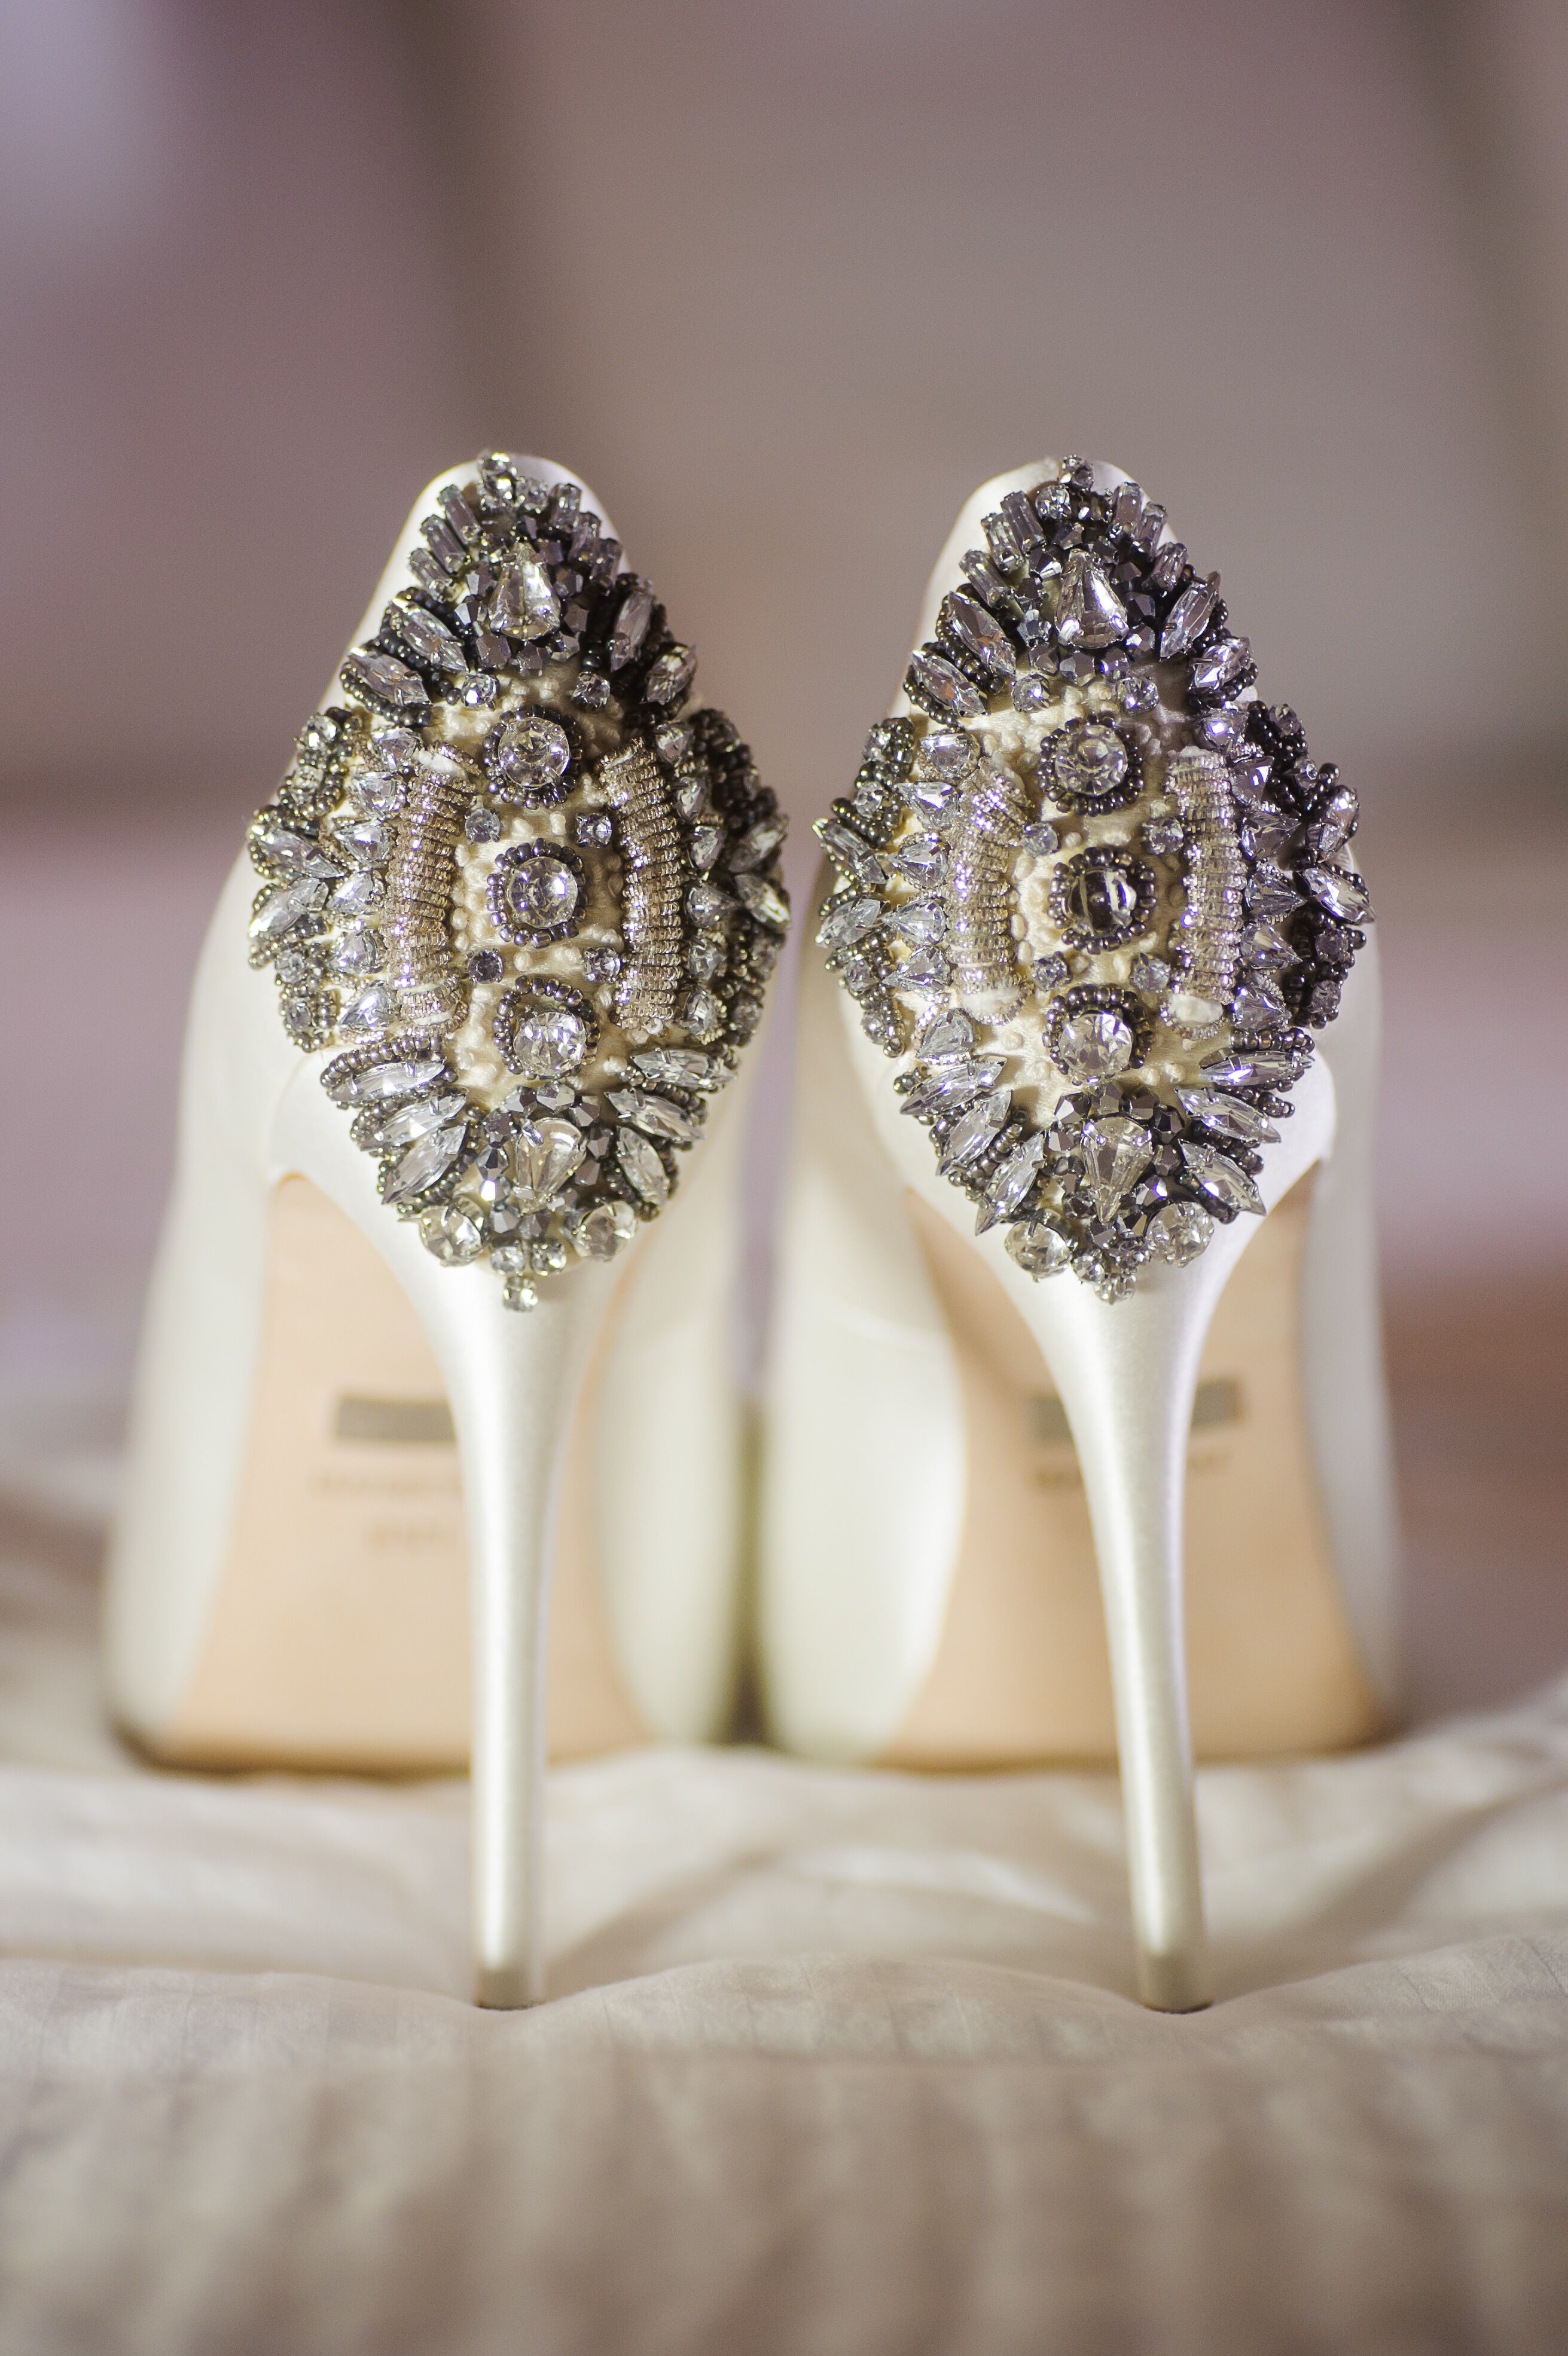 Stiletto Heels with Jewel Accents